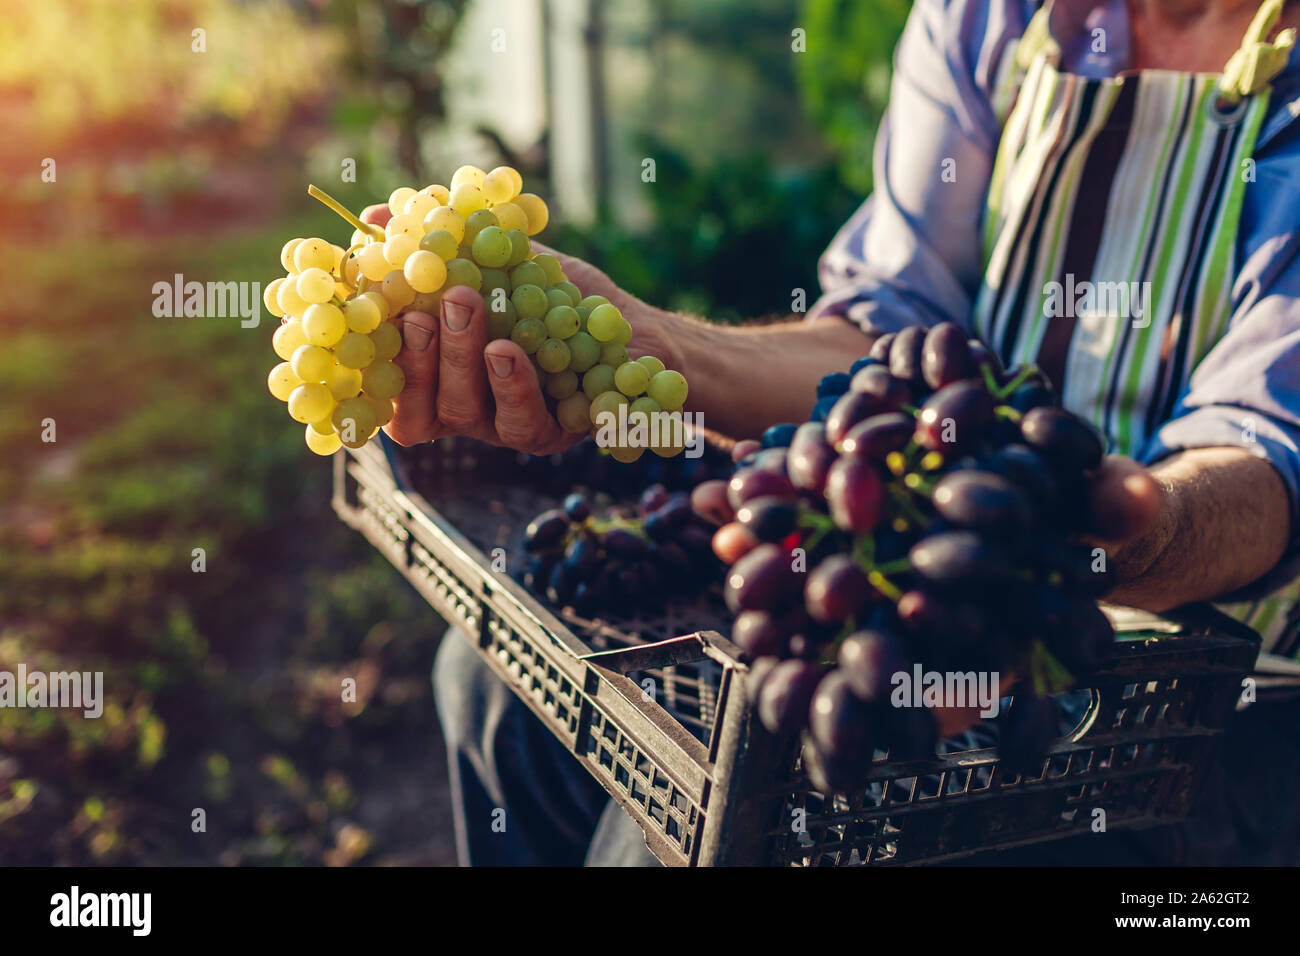 Autumn harvesting. Farmer picking crop of grapes on ecological farm. Happy senior man holding green and blue grapes. Gardening, farming concept Stock Photo